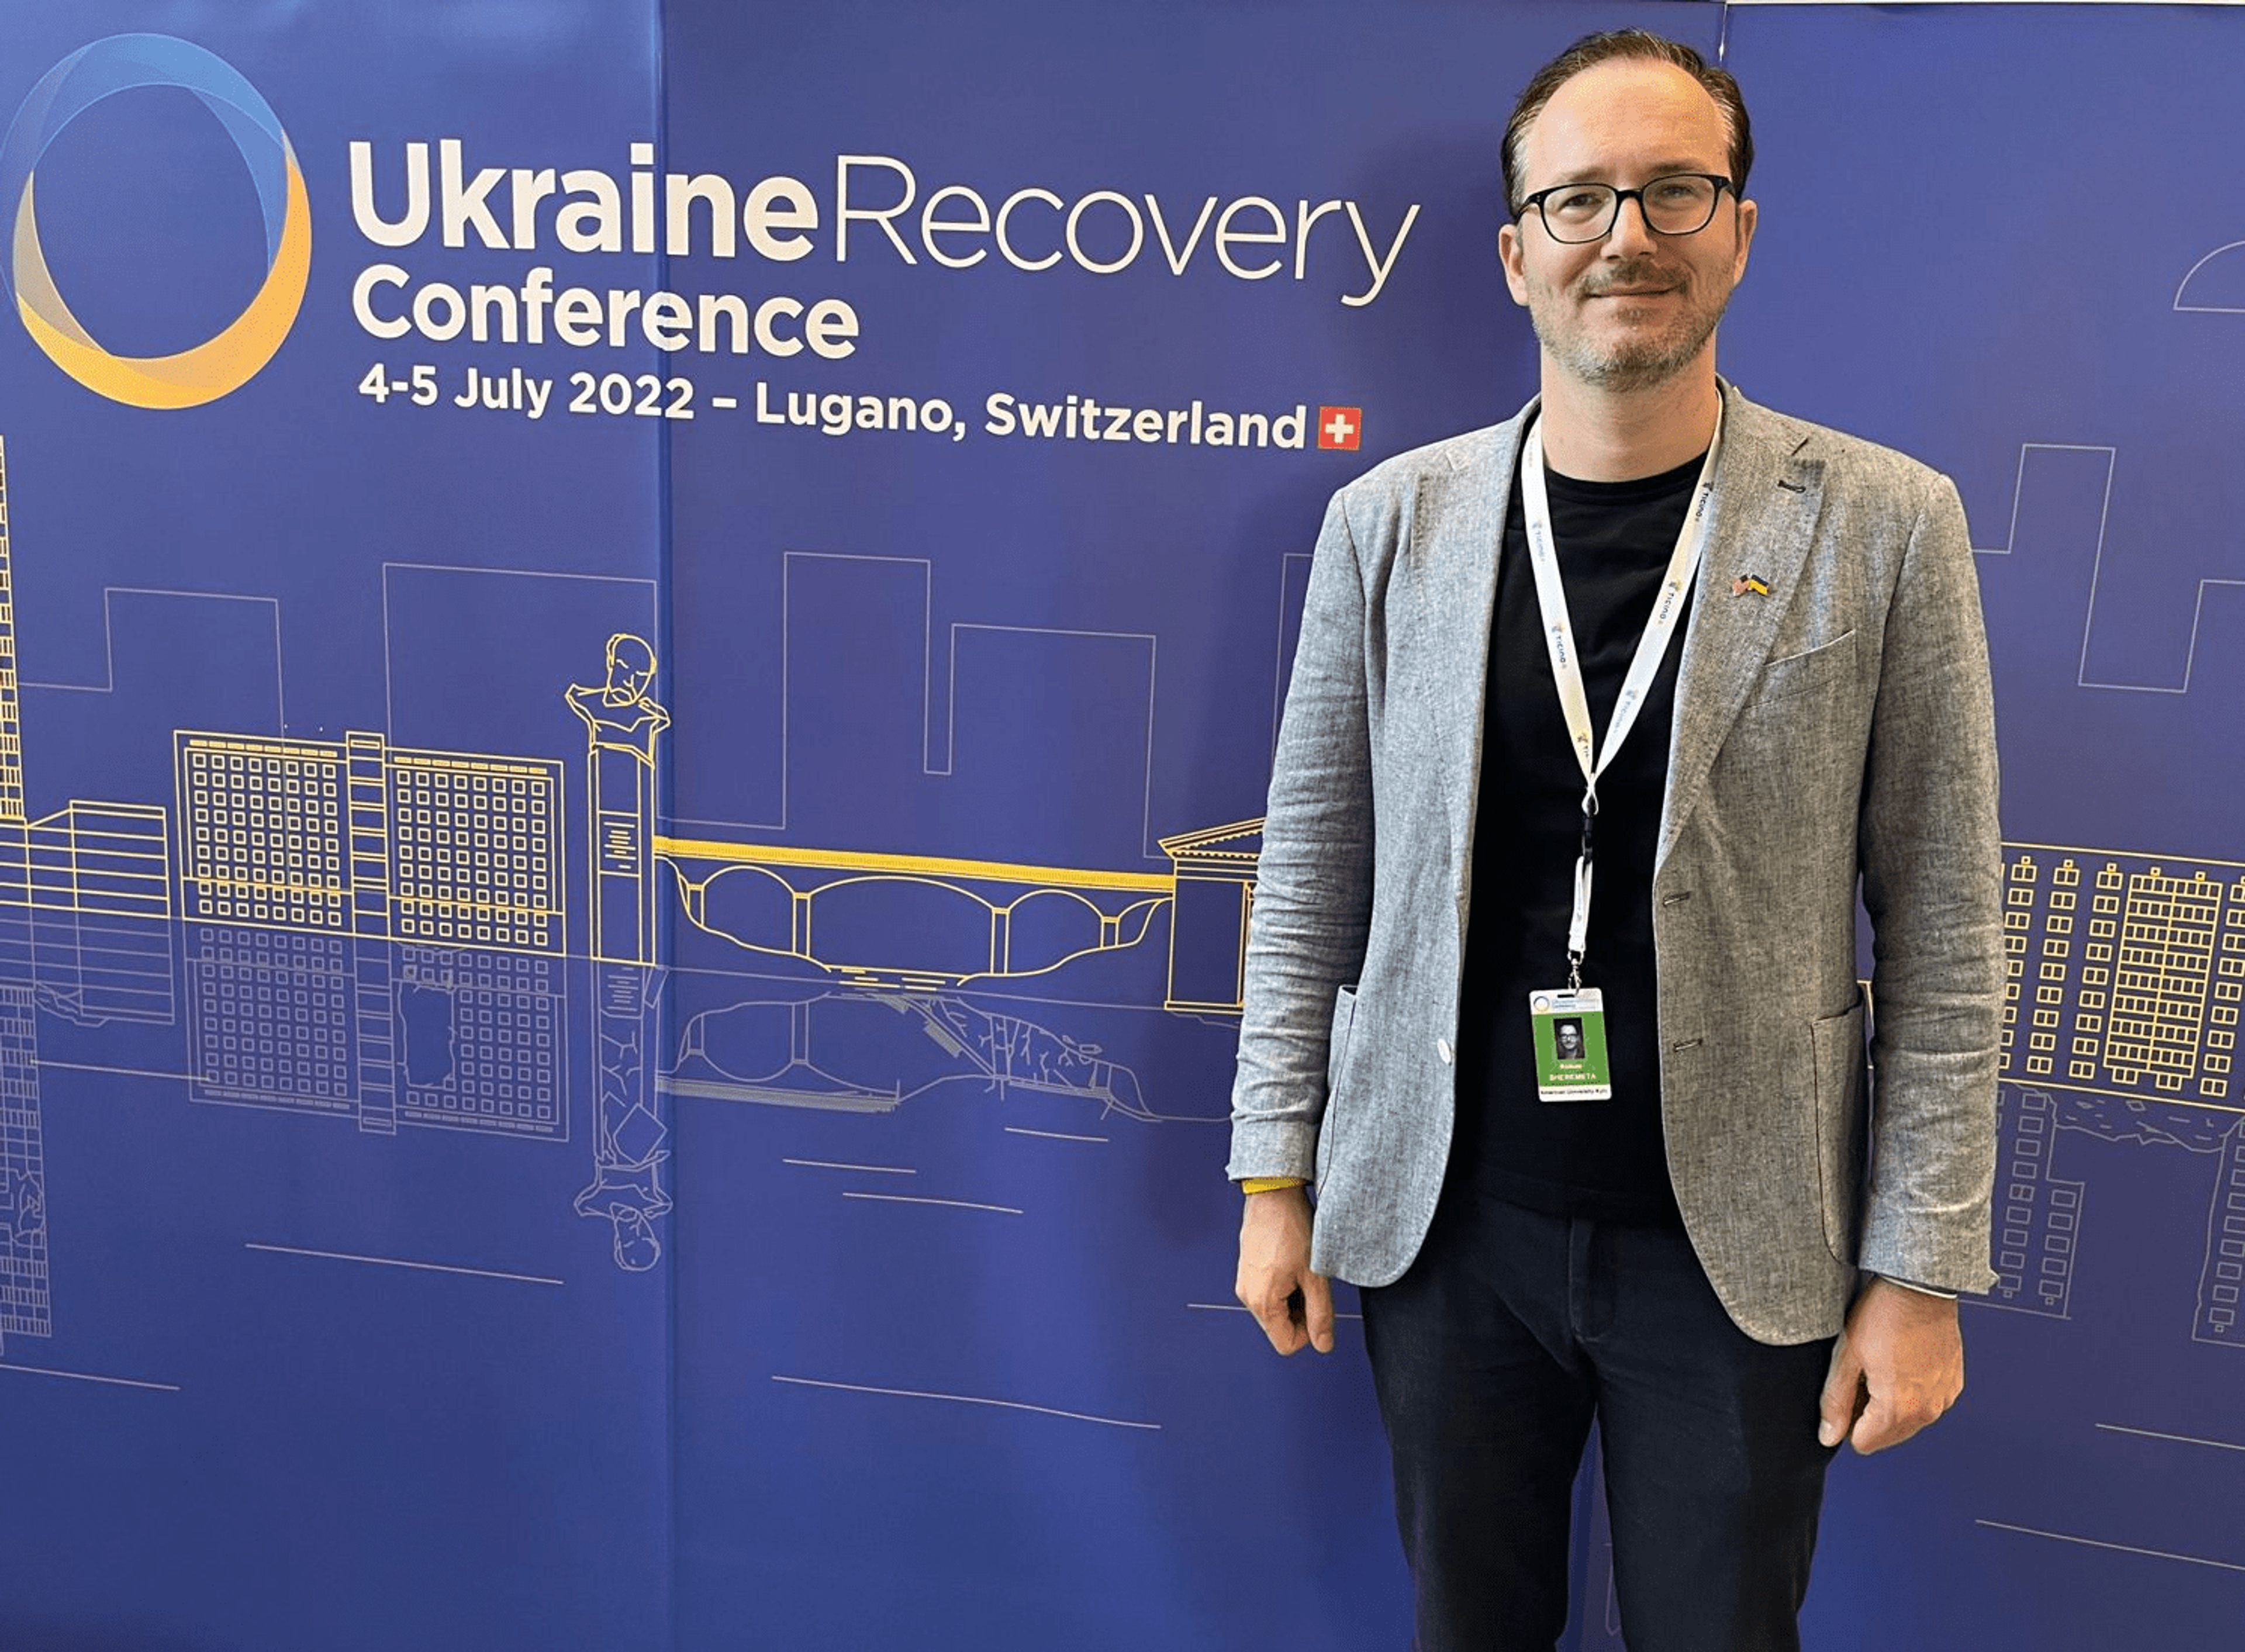 Co-chair of UA House Roman Sheremeta participated in the Ukraine Recovery Conference in Lugano